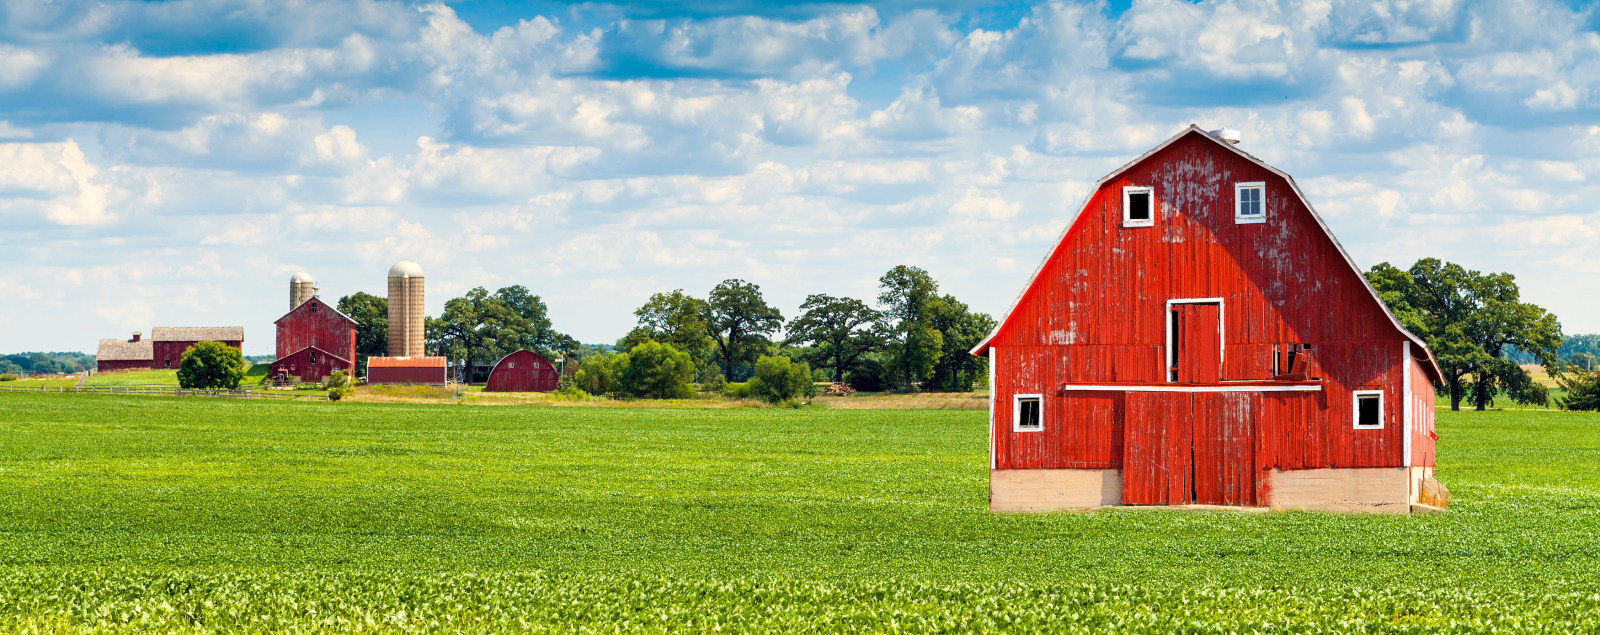 A red barn on a green field.